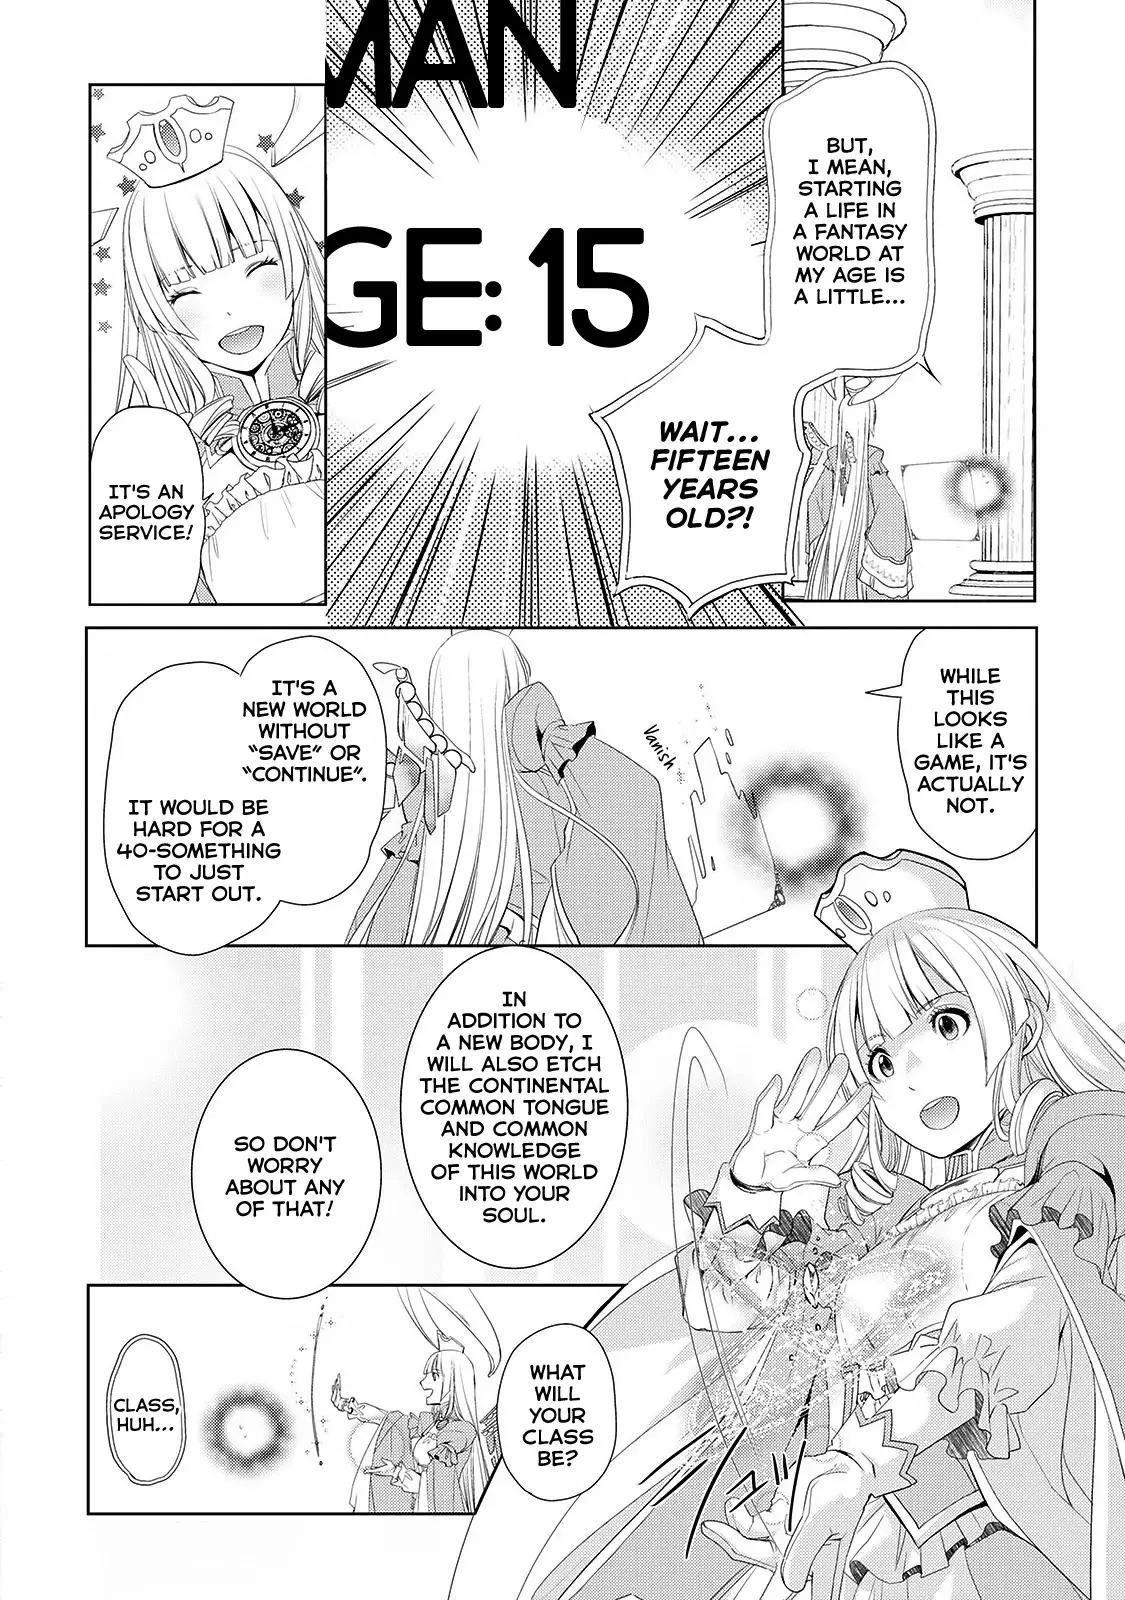 Someday Will I Be The Greatest Alchemist? - 1 page 13